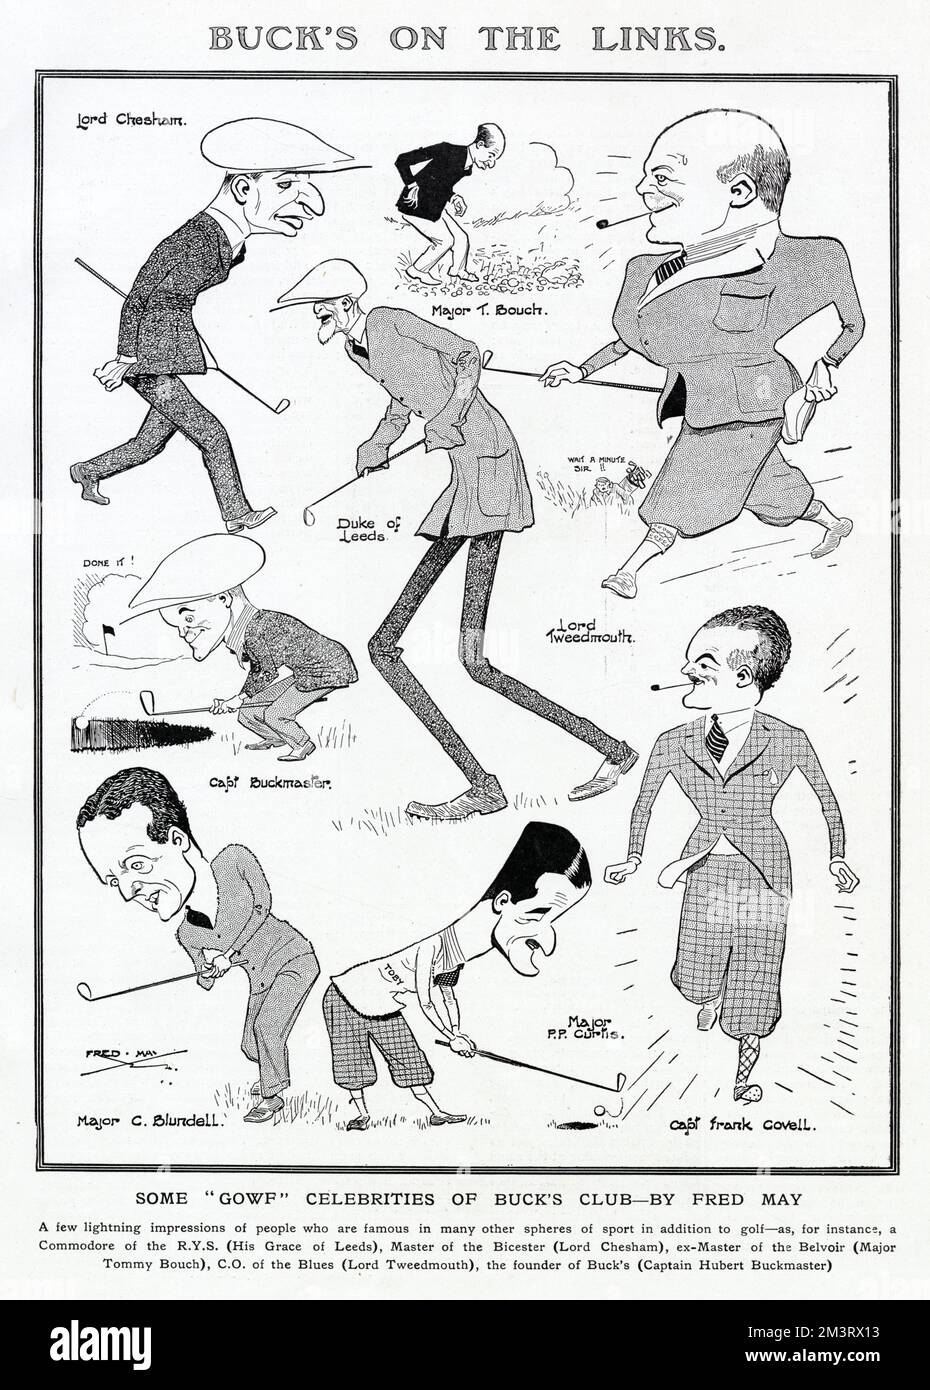 Some celebrities of Buck's Club playing golf caricatured by Fred May in The Tatler.  Includes the Duke of Leeds, Lord Chesham, Major Tommy Bouch, Lord Tweedmouth and Captain Hubert Buckmaster. Stock Photo